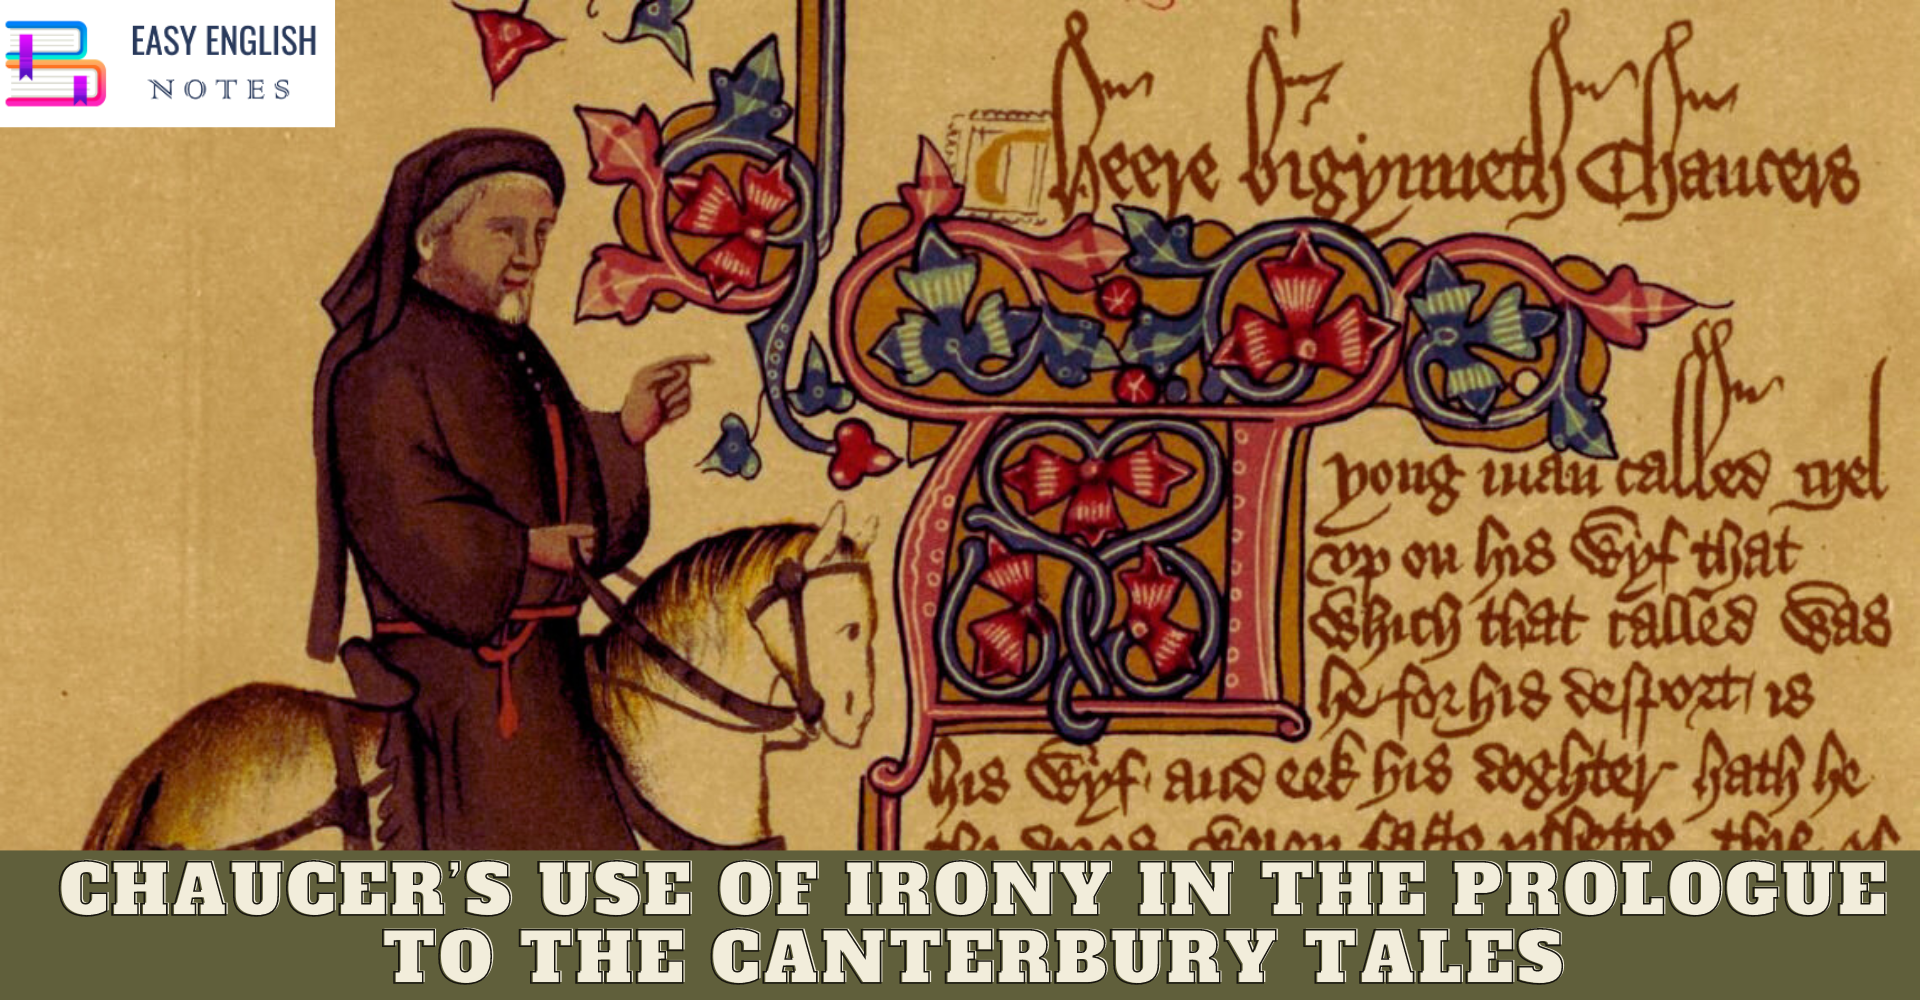 Chaucer’s use of irony in the Prologue to the Canterbury Tales